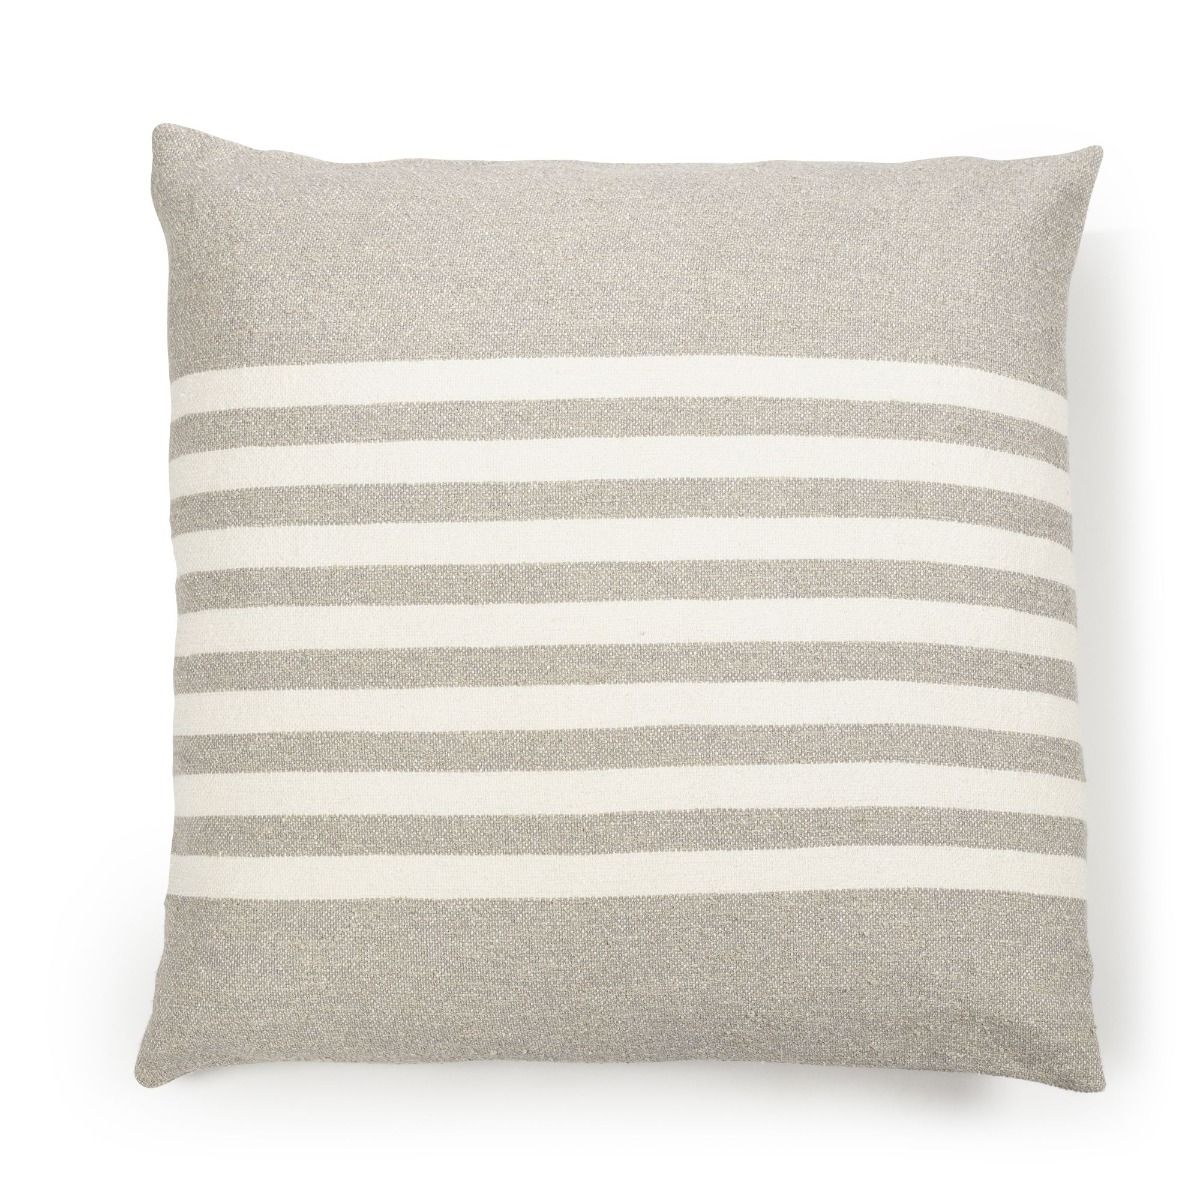 Camille | pillow cover, libeco, - adorn.house